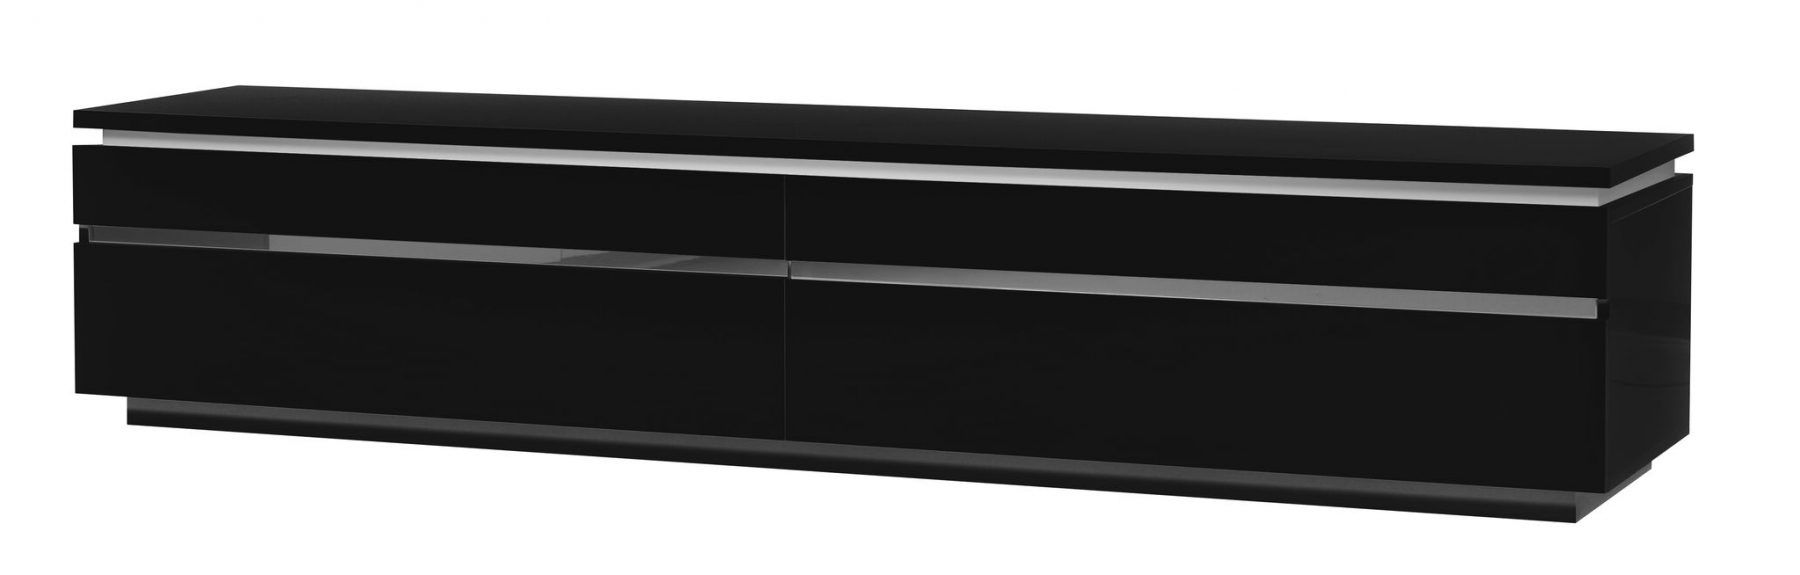 Black Gloss Tv Cabinets Pertaining To Most Up To Date Logan Black Gloss Tv Unit & Lights (View 11 of 20)